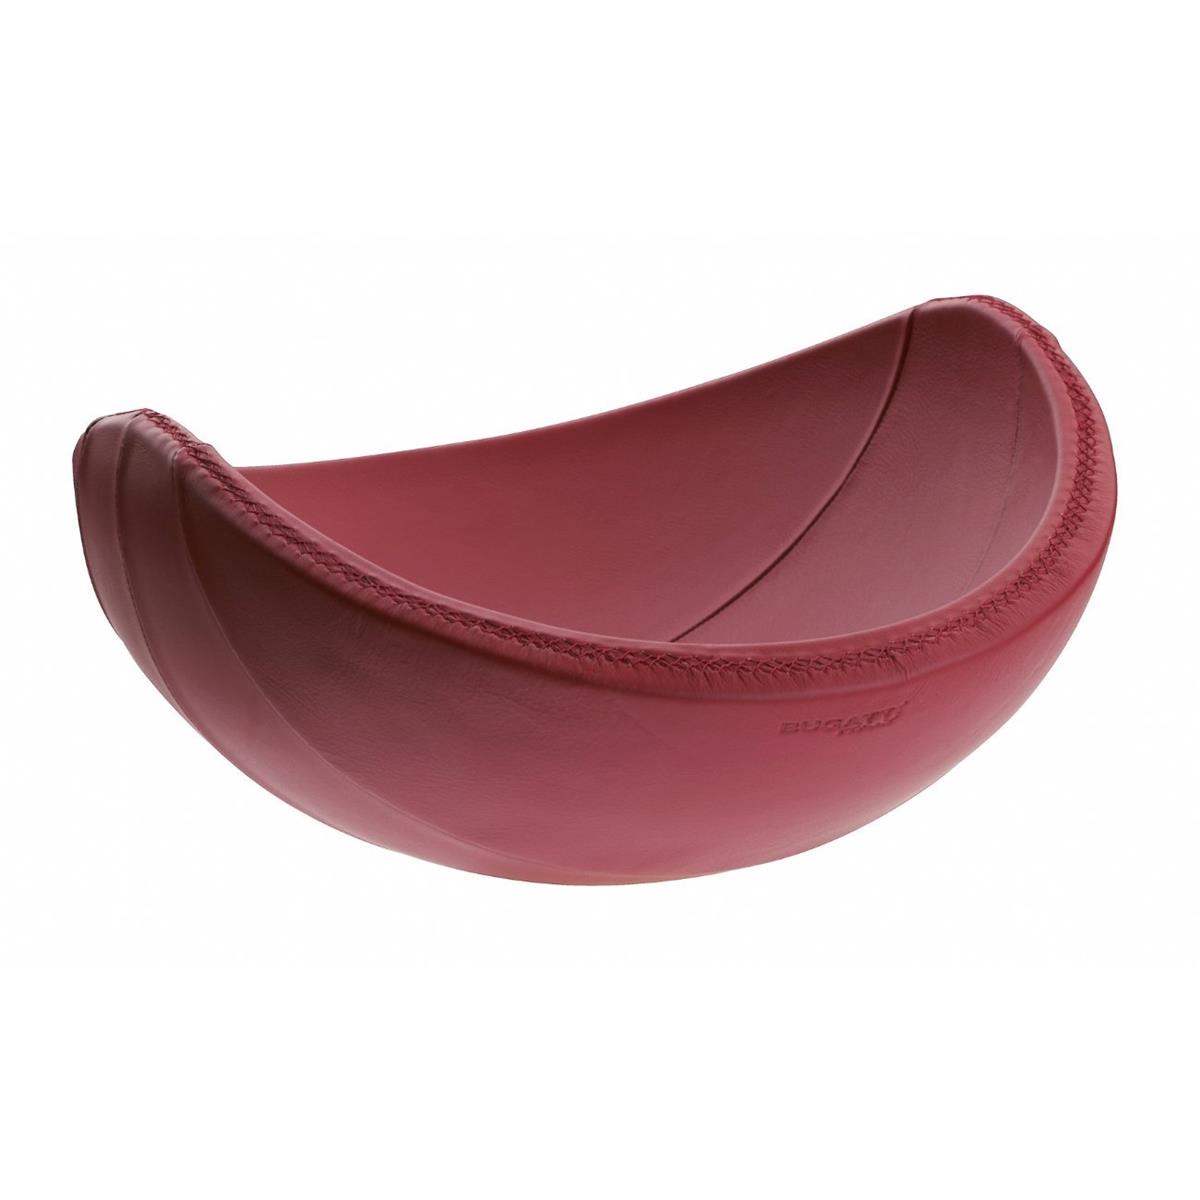 photo NINNAANNA Table Centerpiece - 100% RED Leather Upholstery